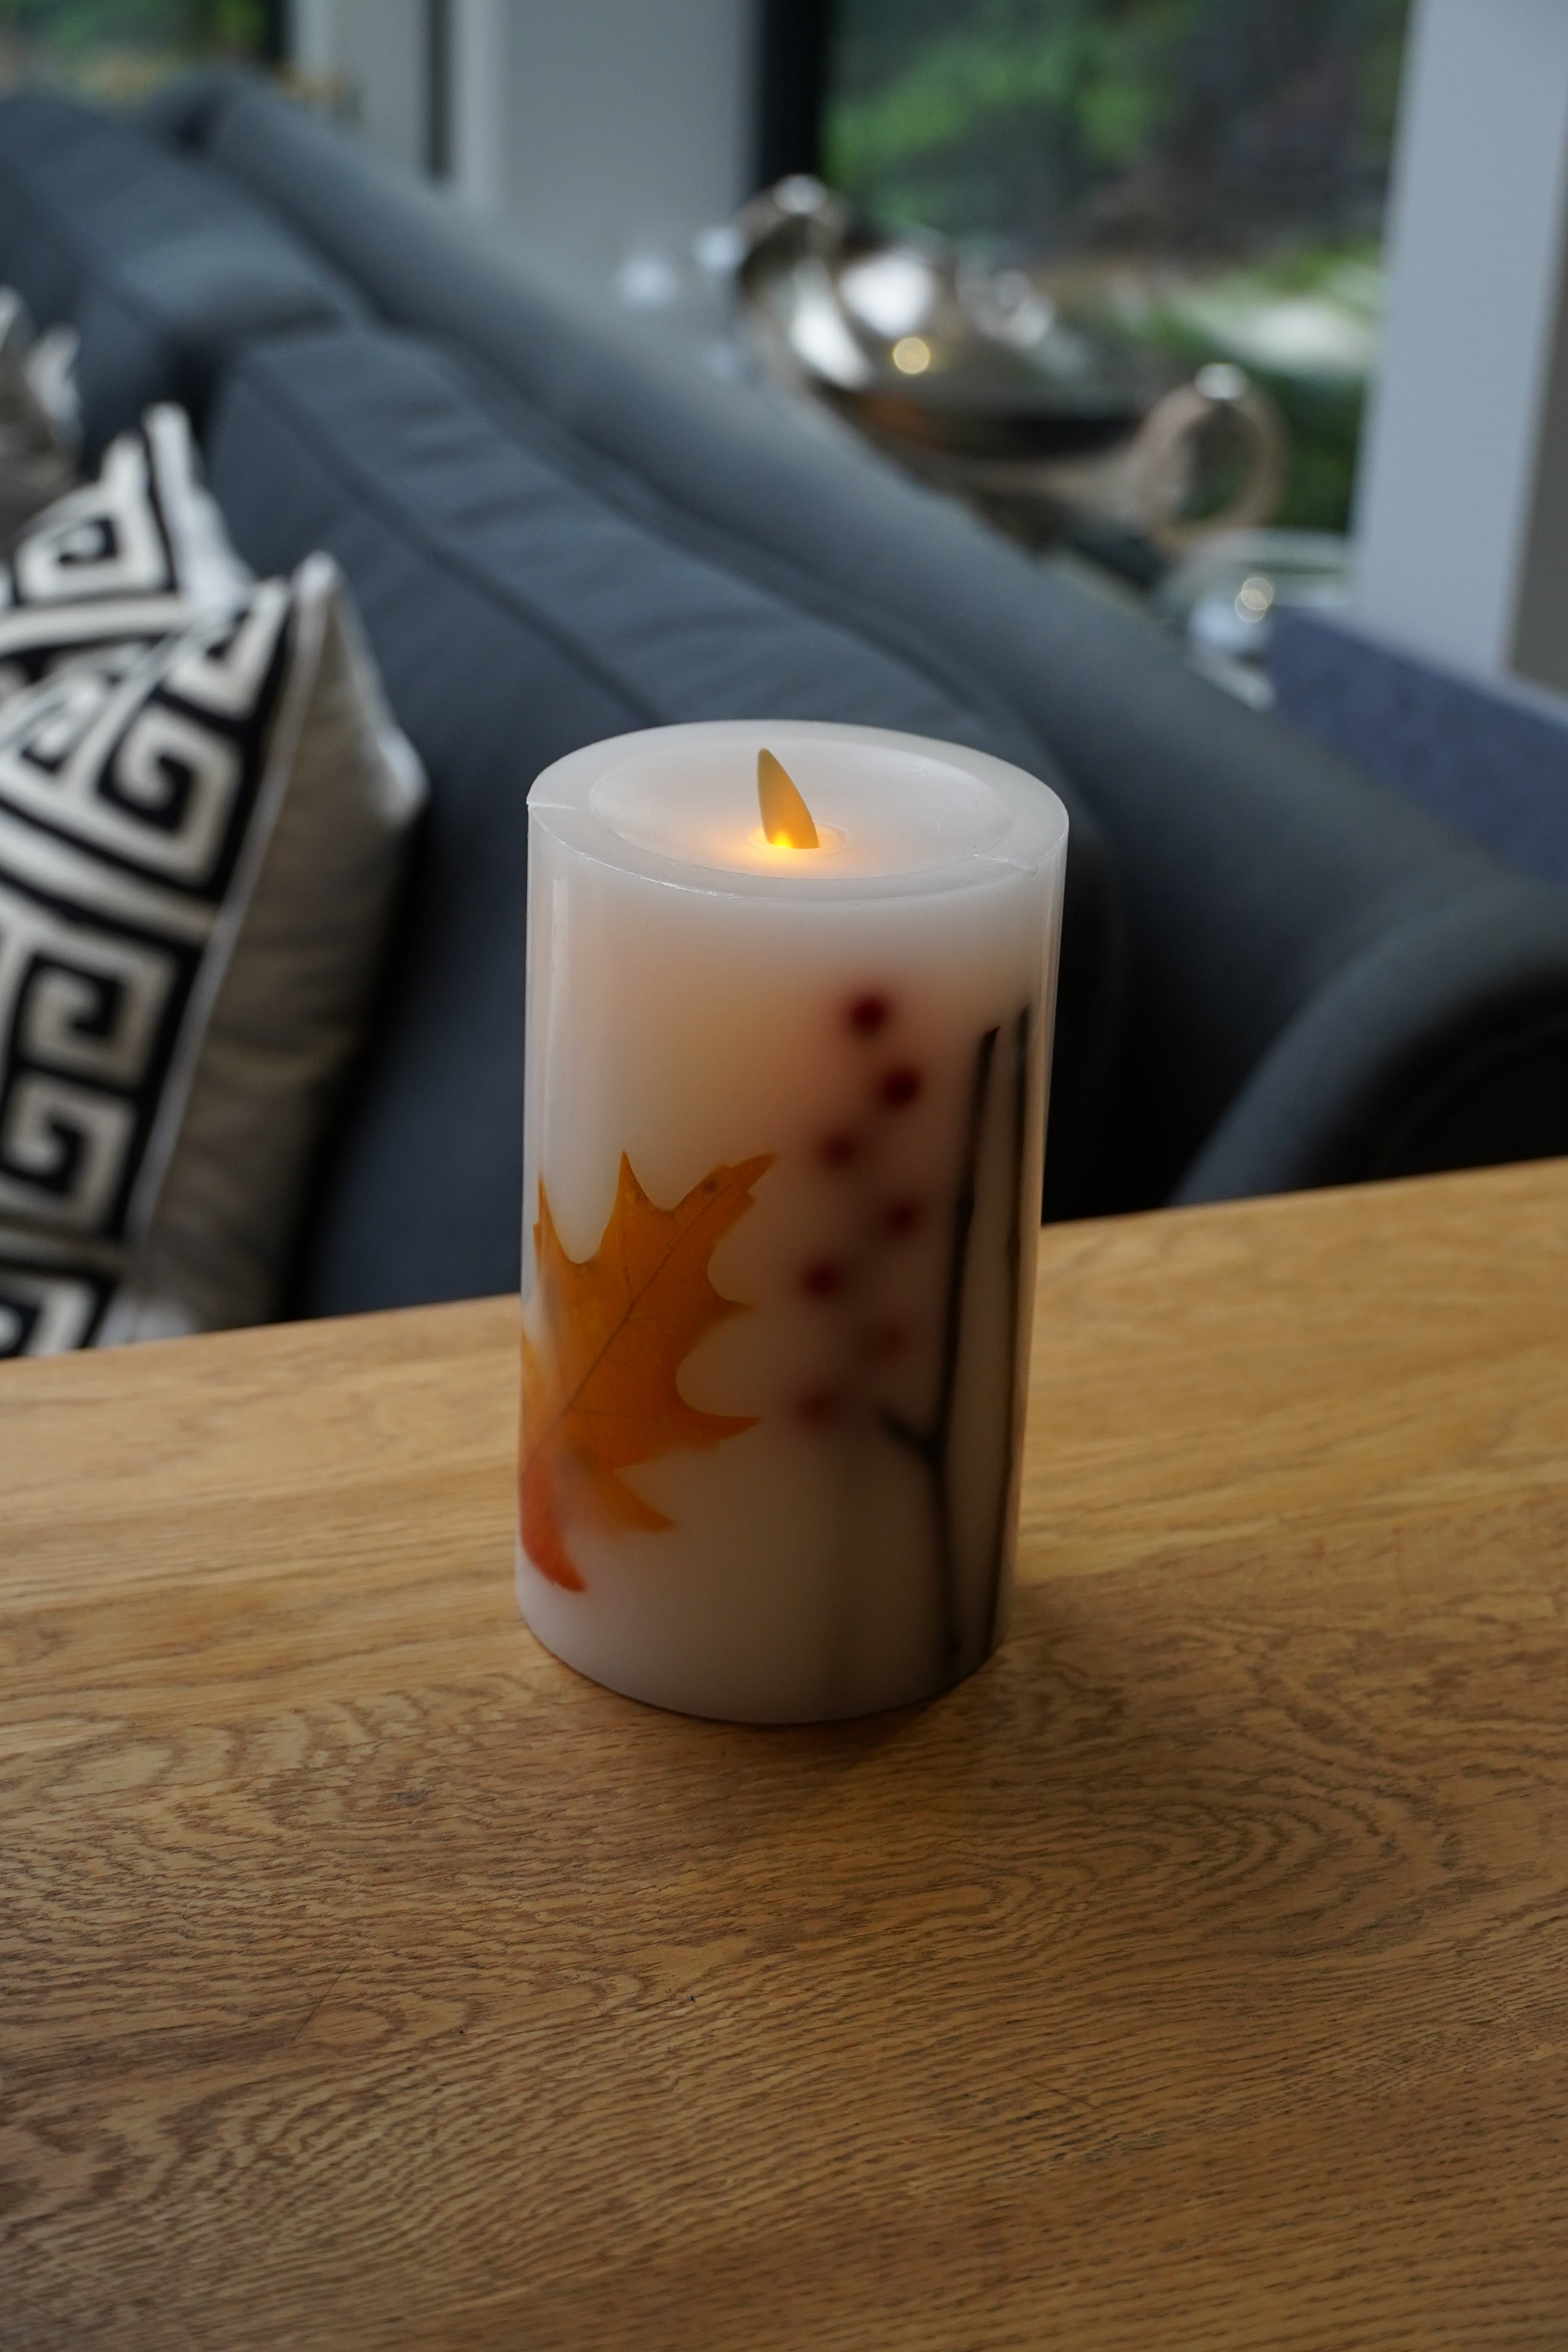 This Luminara Twig, Berry & Leaf Inclusions Flameless Pillar is the fashion-forward centerpiece for all your candle decor needs. They selected this modern melted design to showcase the dancing Real-Flame Effect from all angles, ensuring endless decorating possibilities!